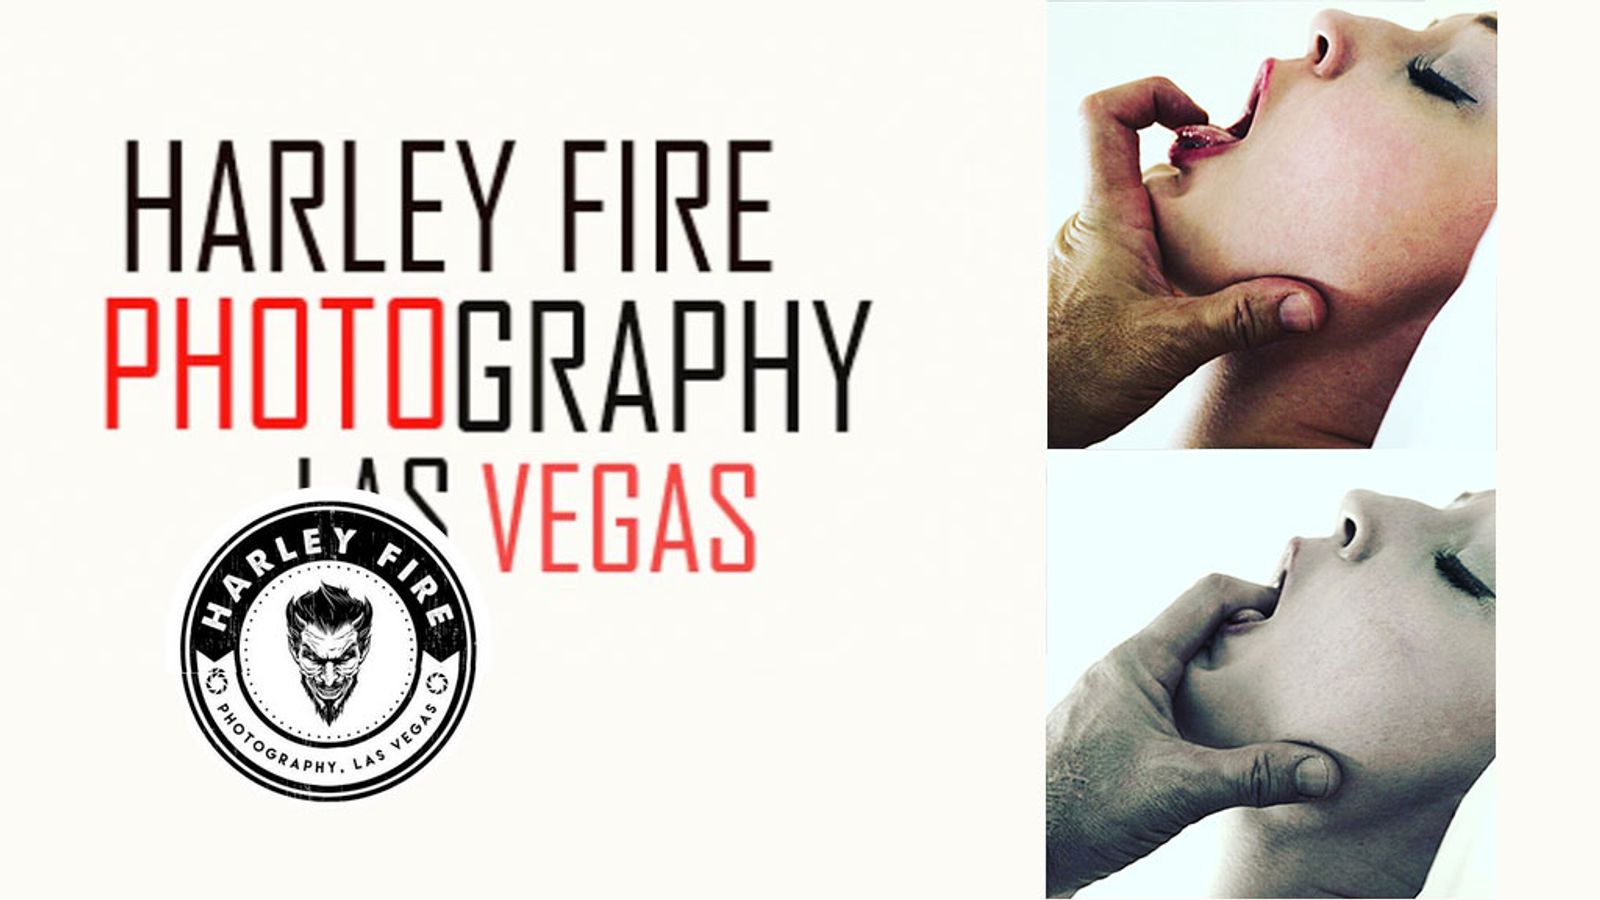 Harley Fire Opens Adult Photography Studio In Vegas